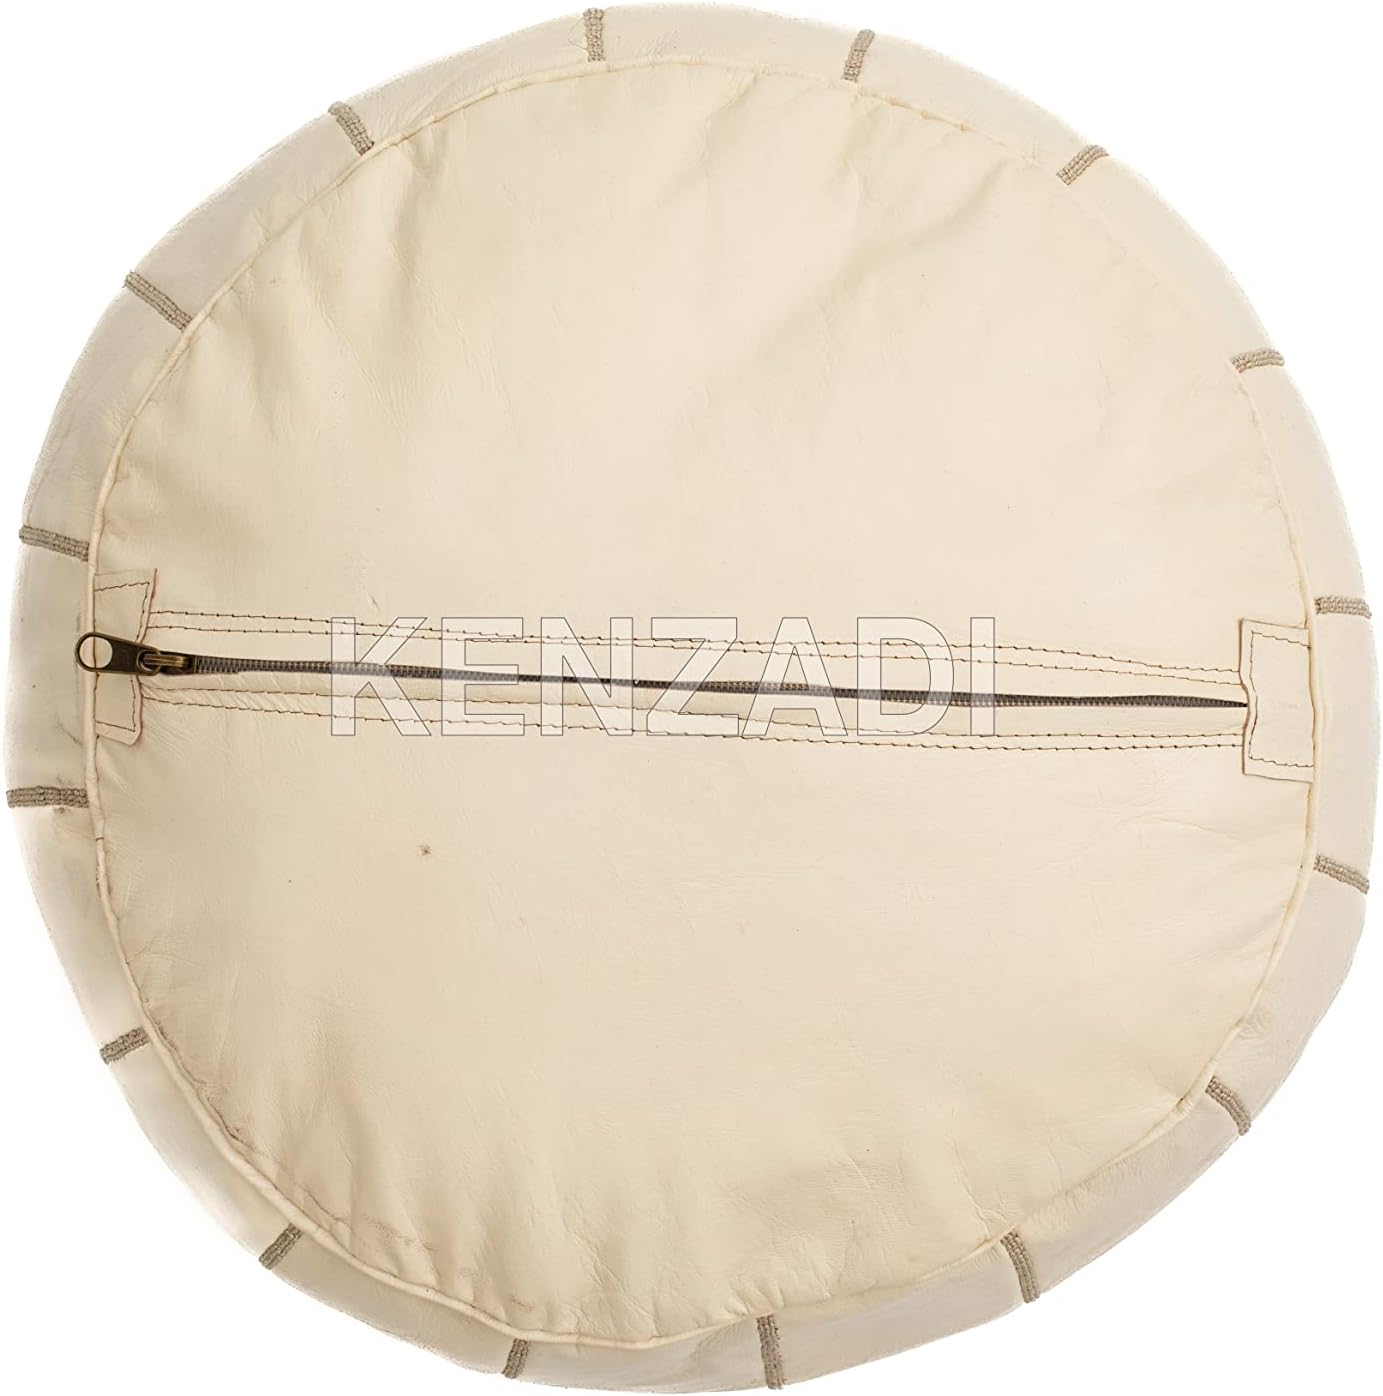 Genuine Leather Pouf Stuffed Handmade Stitched in Marrakech by Moroccan Artisans (Creamy White) - Handmade by My Poufs